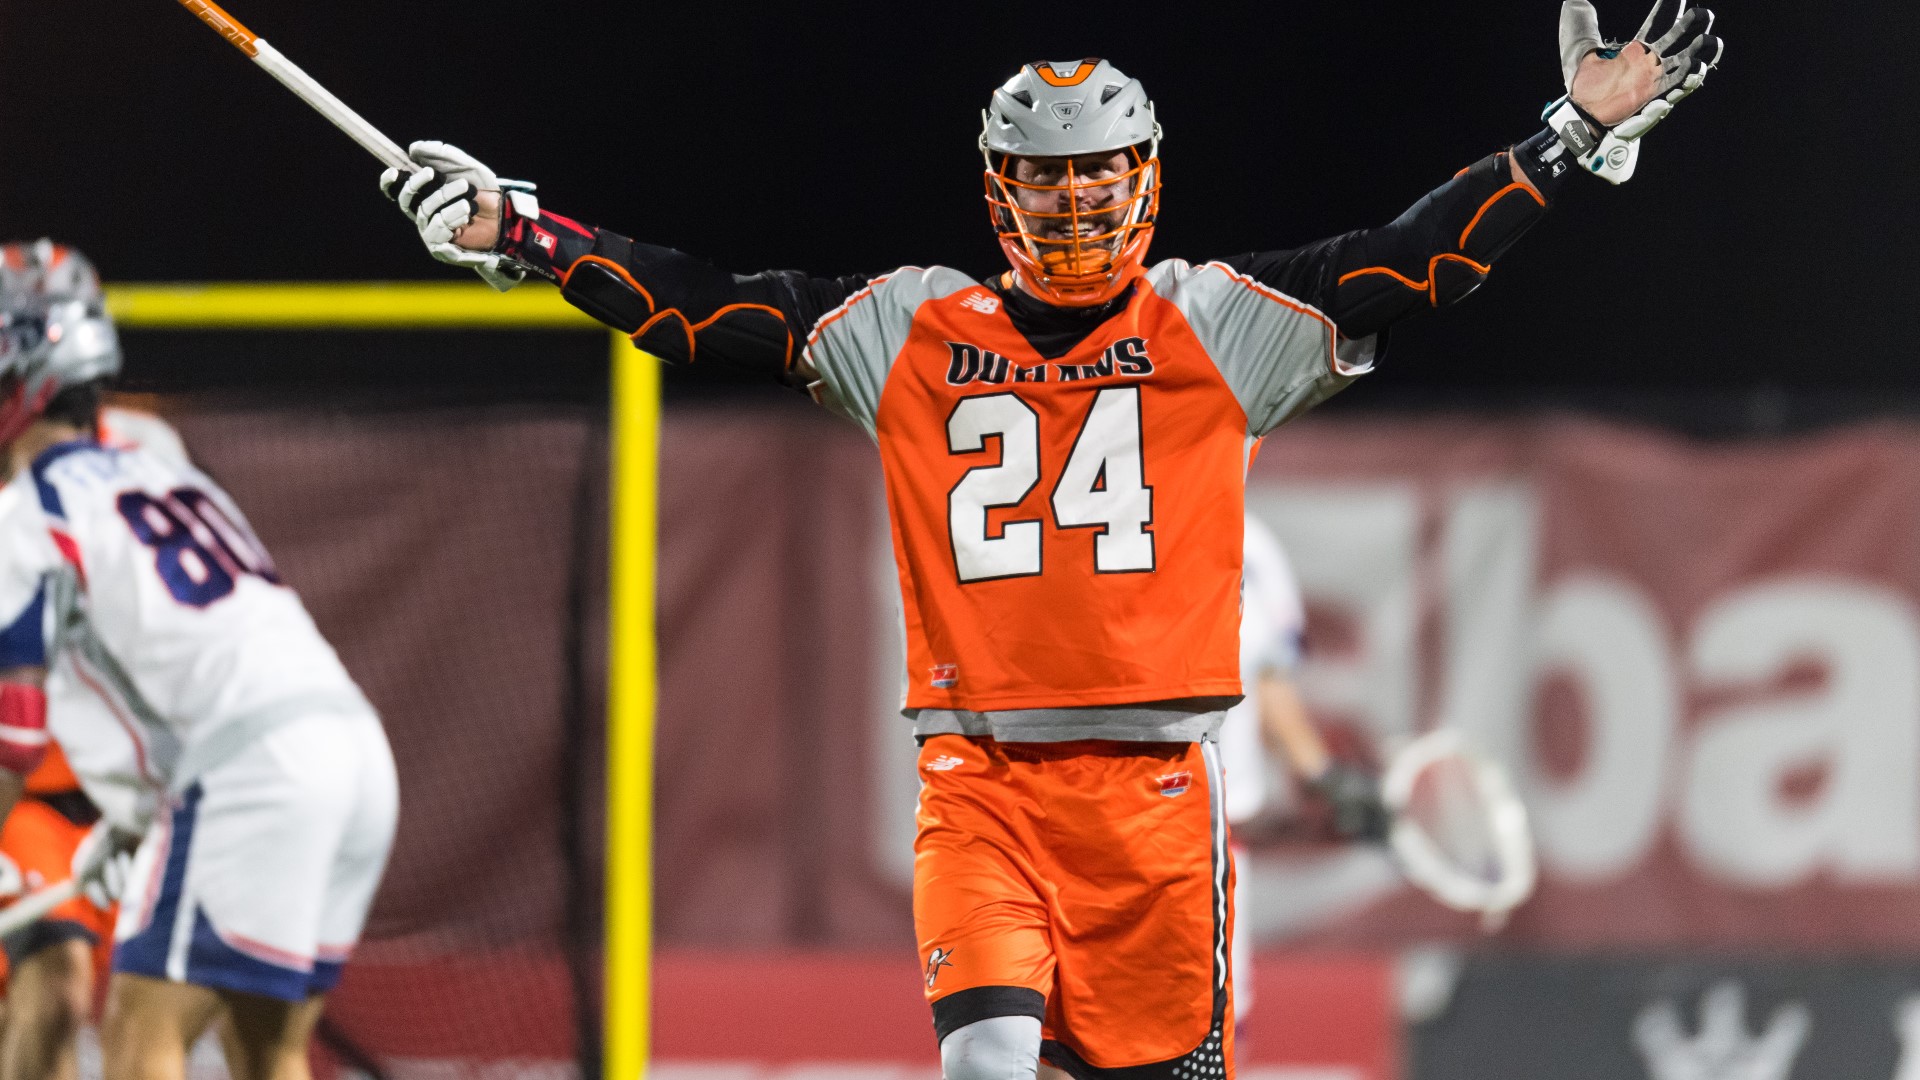 Denver Outlaws storm back against Cannons to advance to MLL